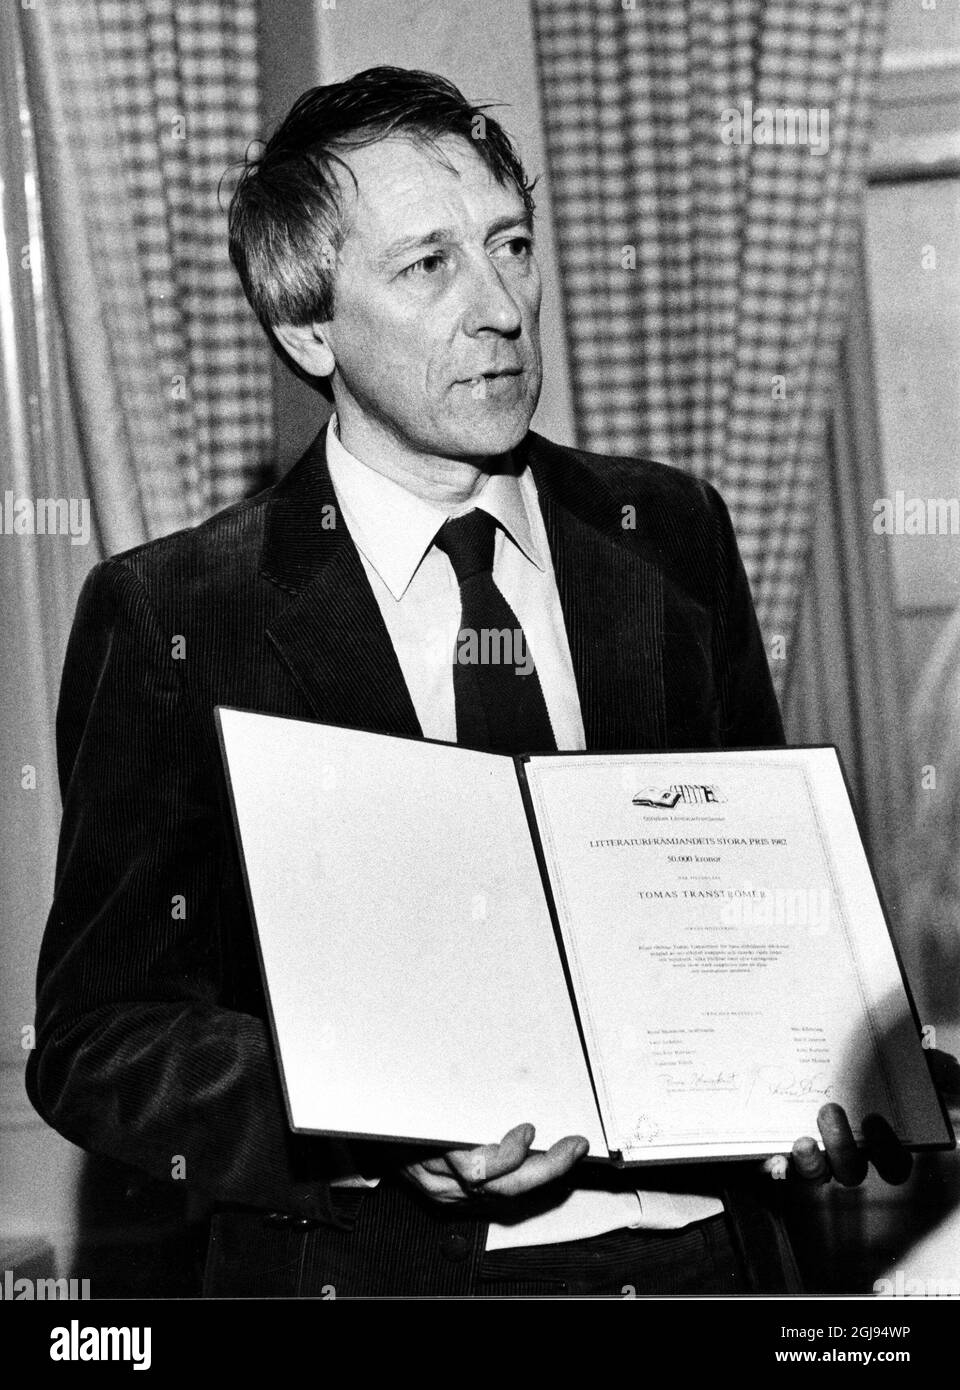 STOCKHOLM 20040518 / ARKIV A file picture of Swedish poet and winner of the Nobel Prize in Literature Tomas Transtromer who has passed away at the age of 83. *** Swedish Poet Tomas Transtromer, ***Arkivbild fran 19821215*** Foto: Ragnhild Haarstad / SvD / SCANPIX Code 30052  Stock Photo